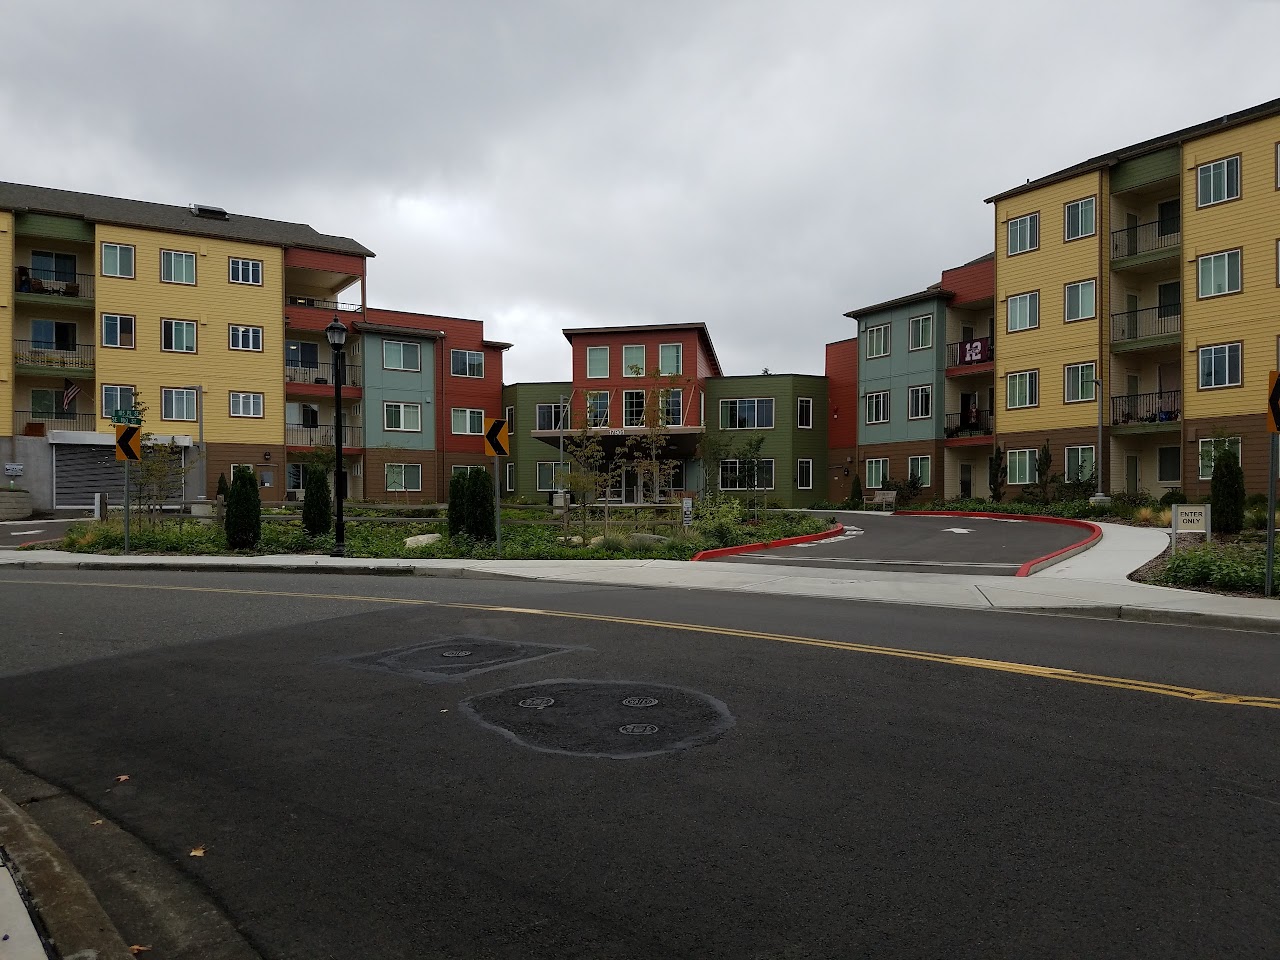 Photo of VANTAGE POINT APARTMENTS. Affordable housing located at 17901 105TH PLACE SE RENTON, WA 98055